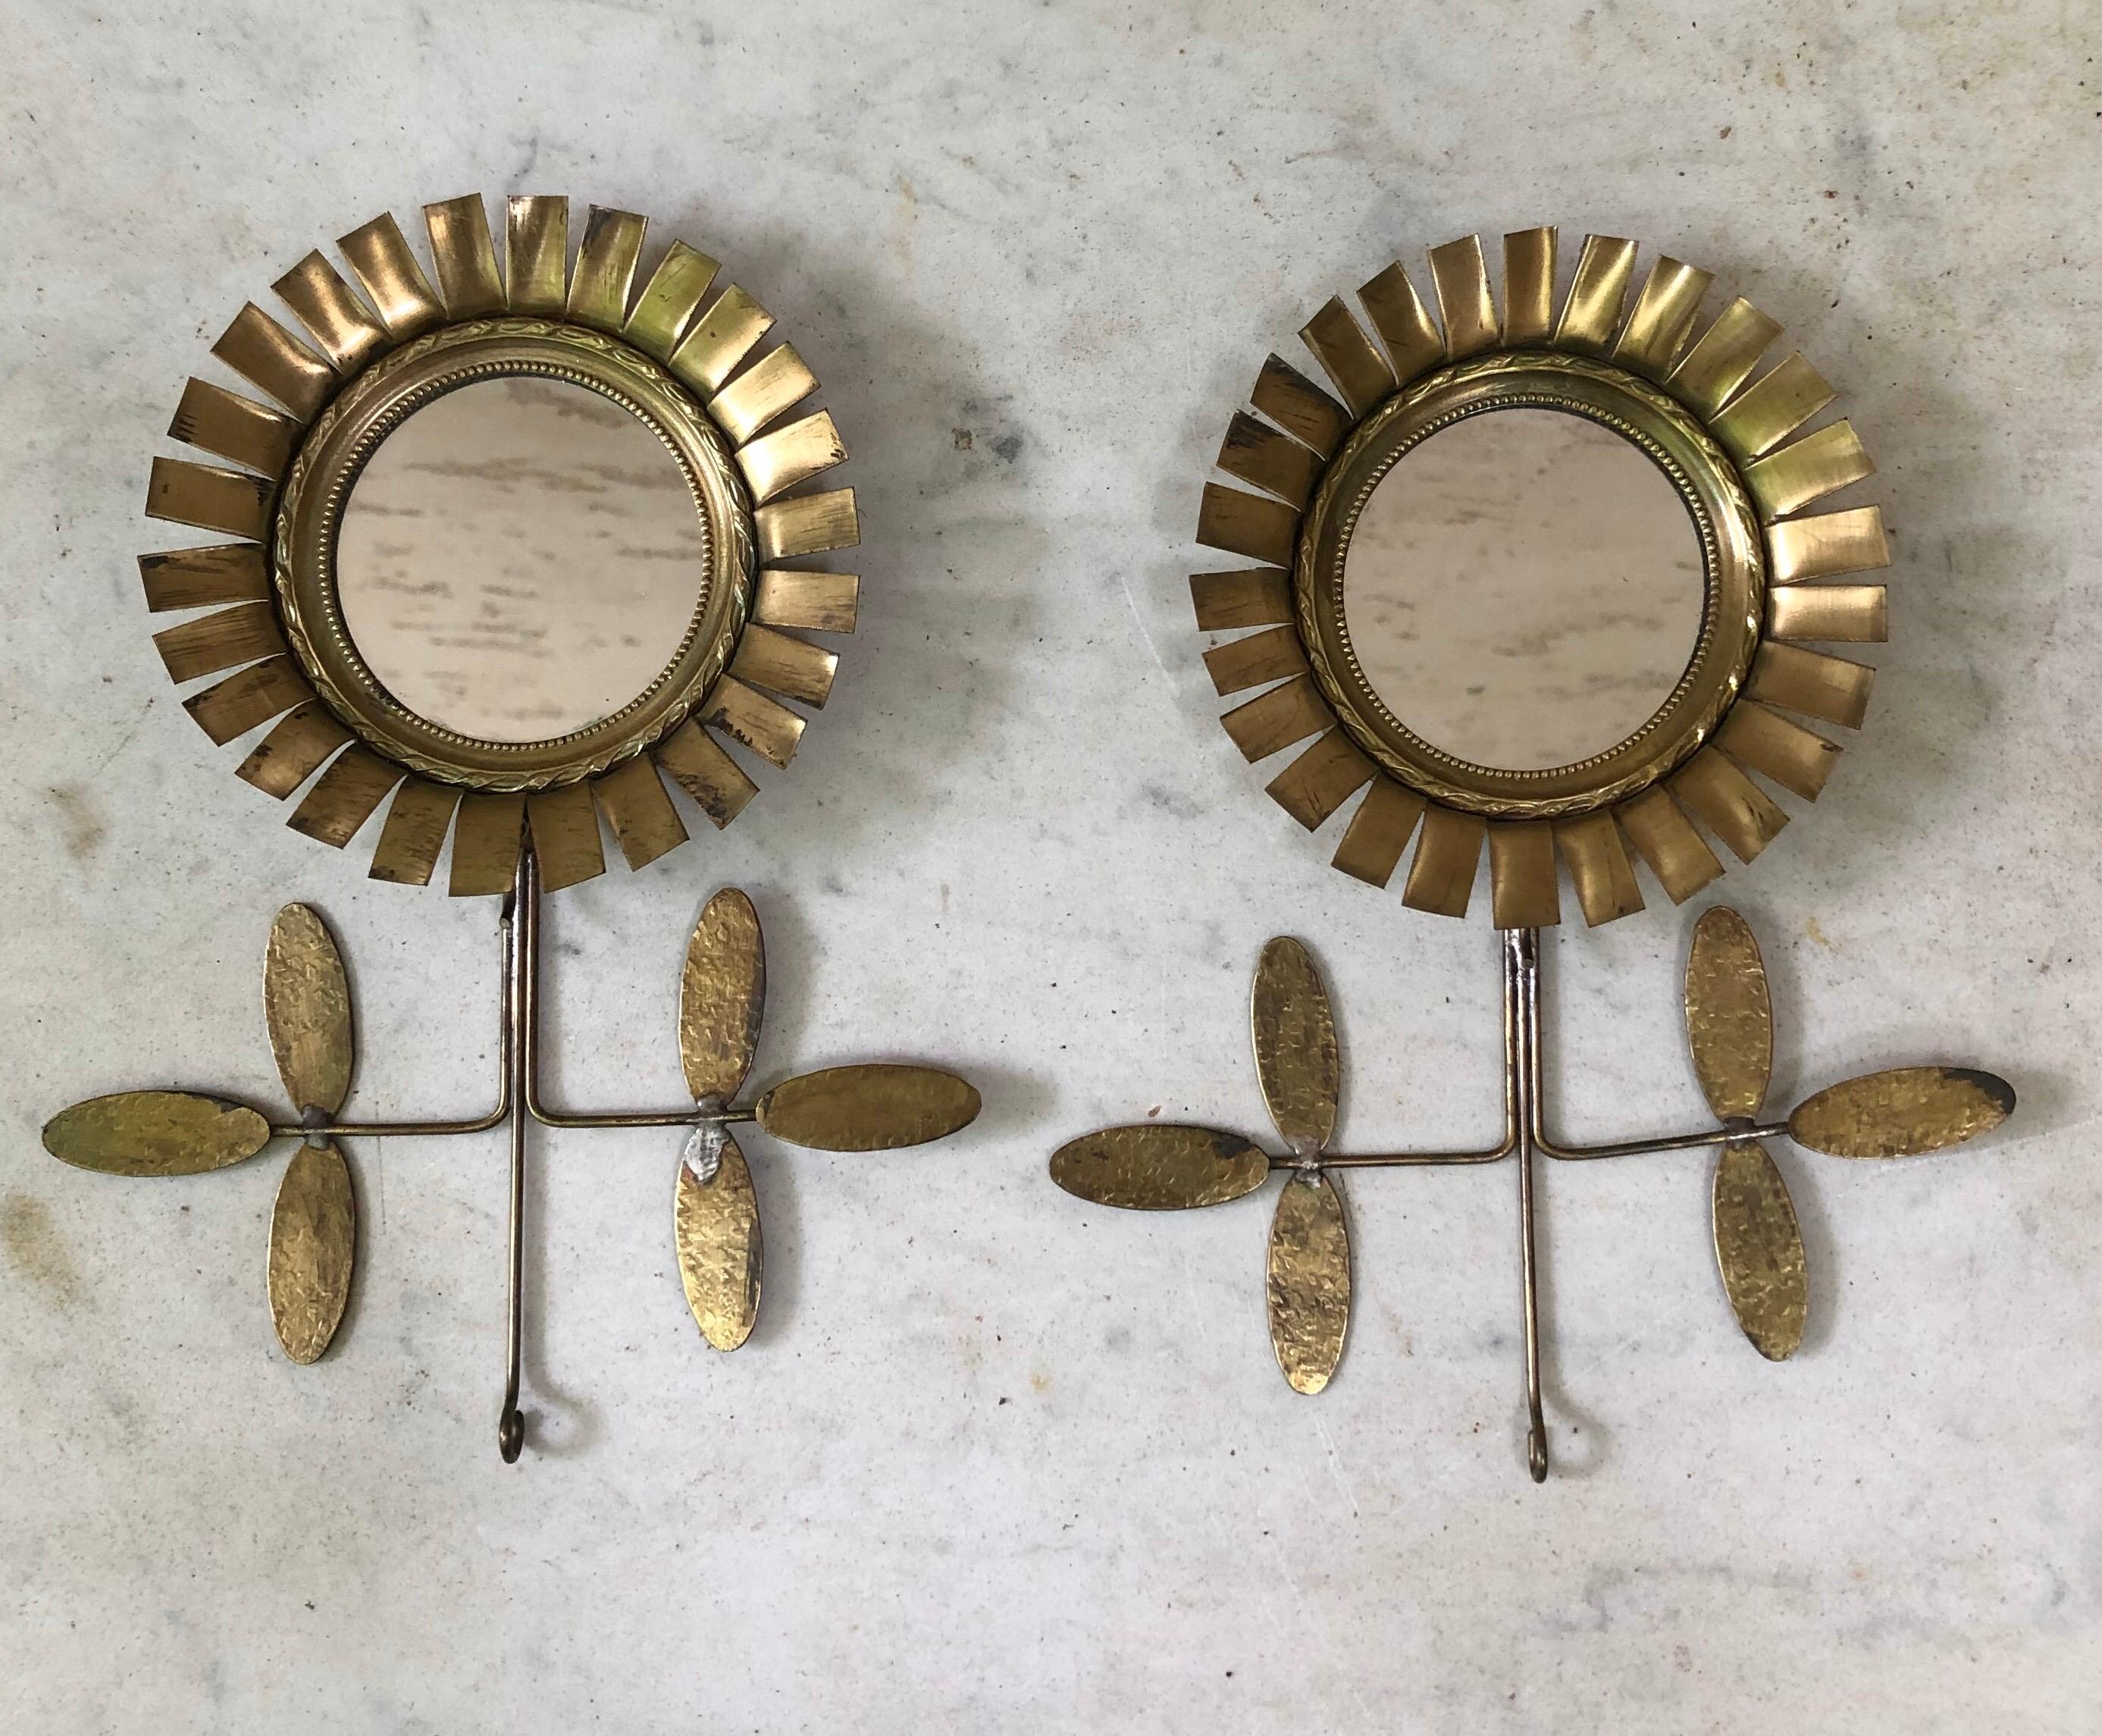 Small French gold metal flower mirror, circa 1960.
2 mirrors available.
Measures: Mirror diameter / 4.5 inches.
Total height / 8 inches.